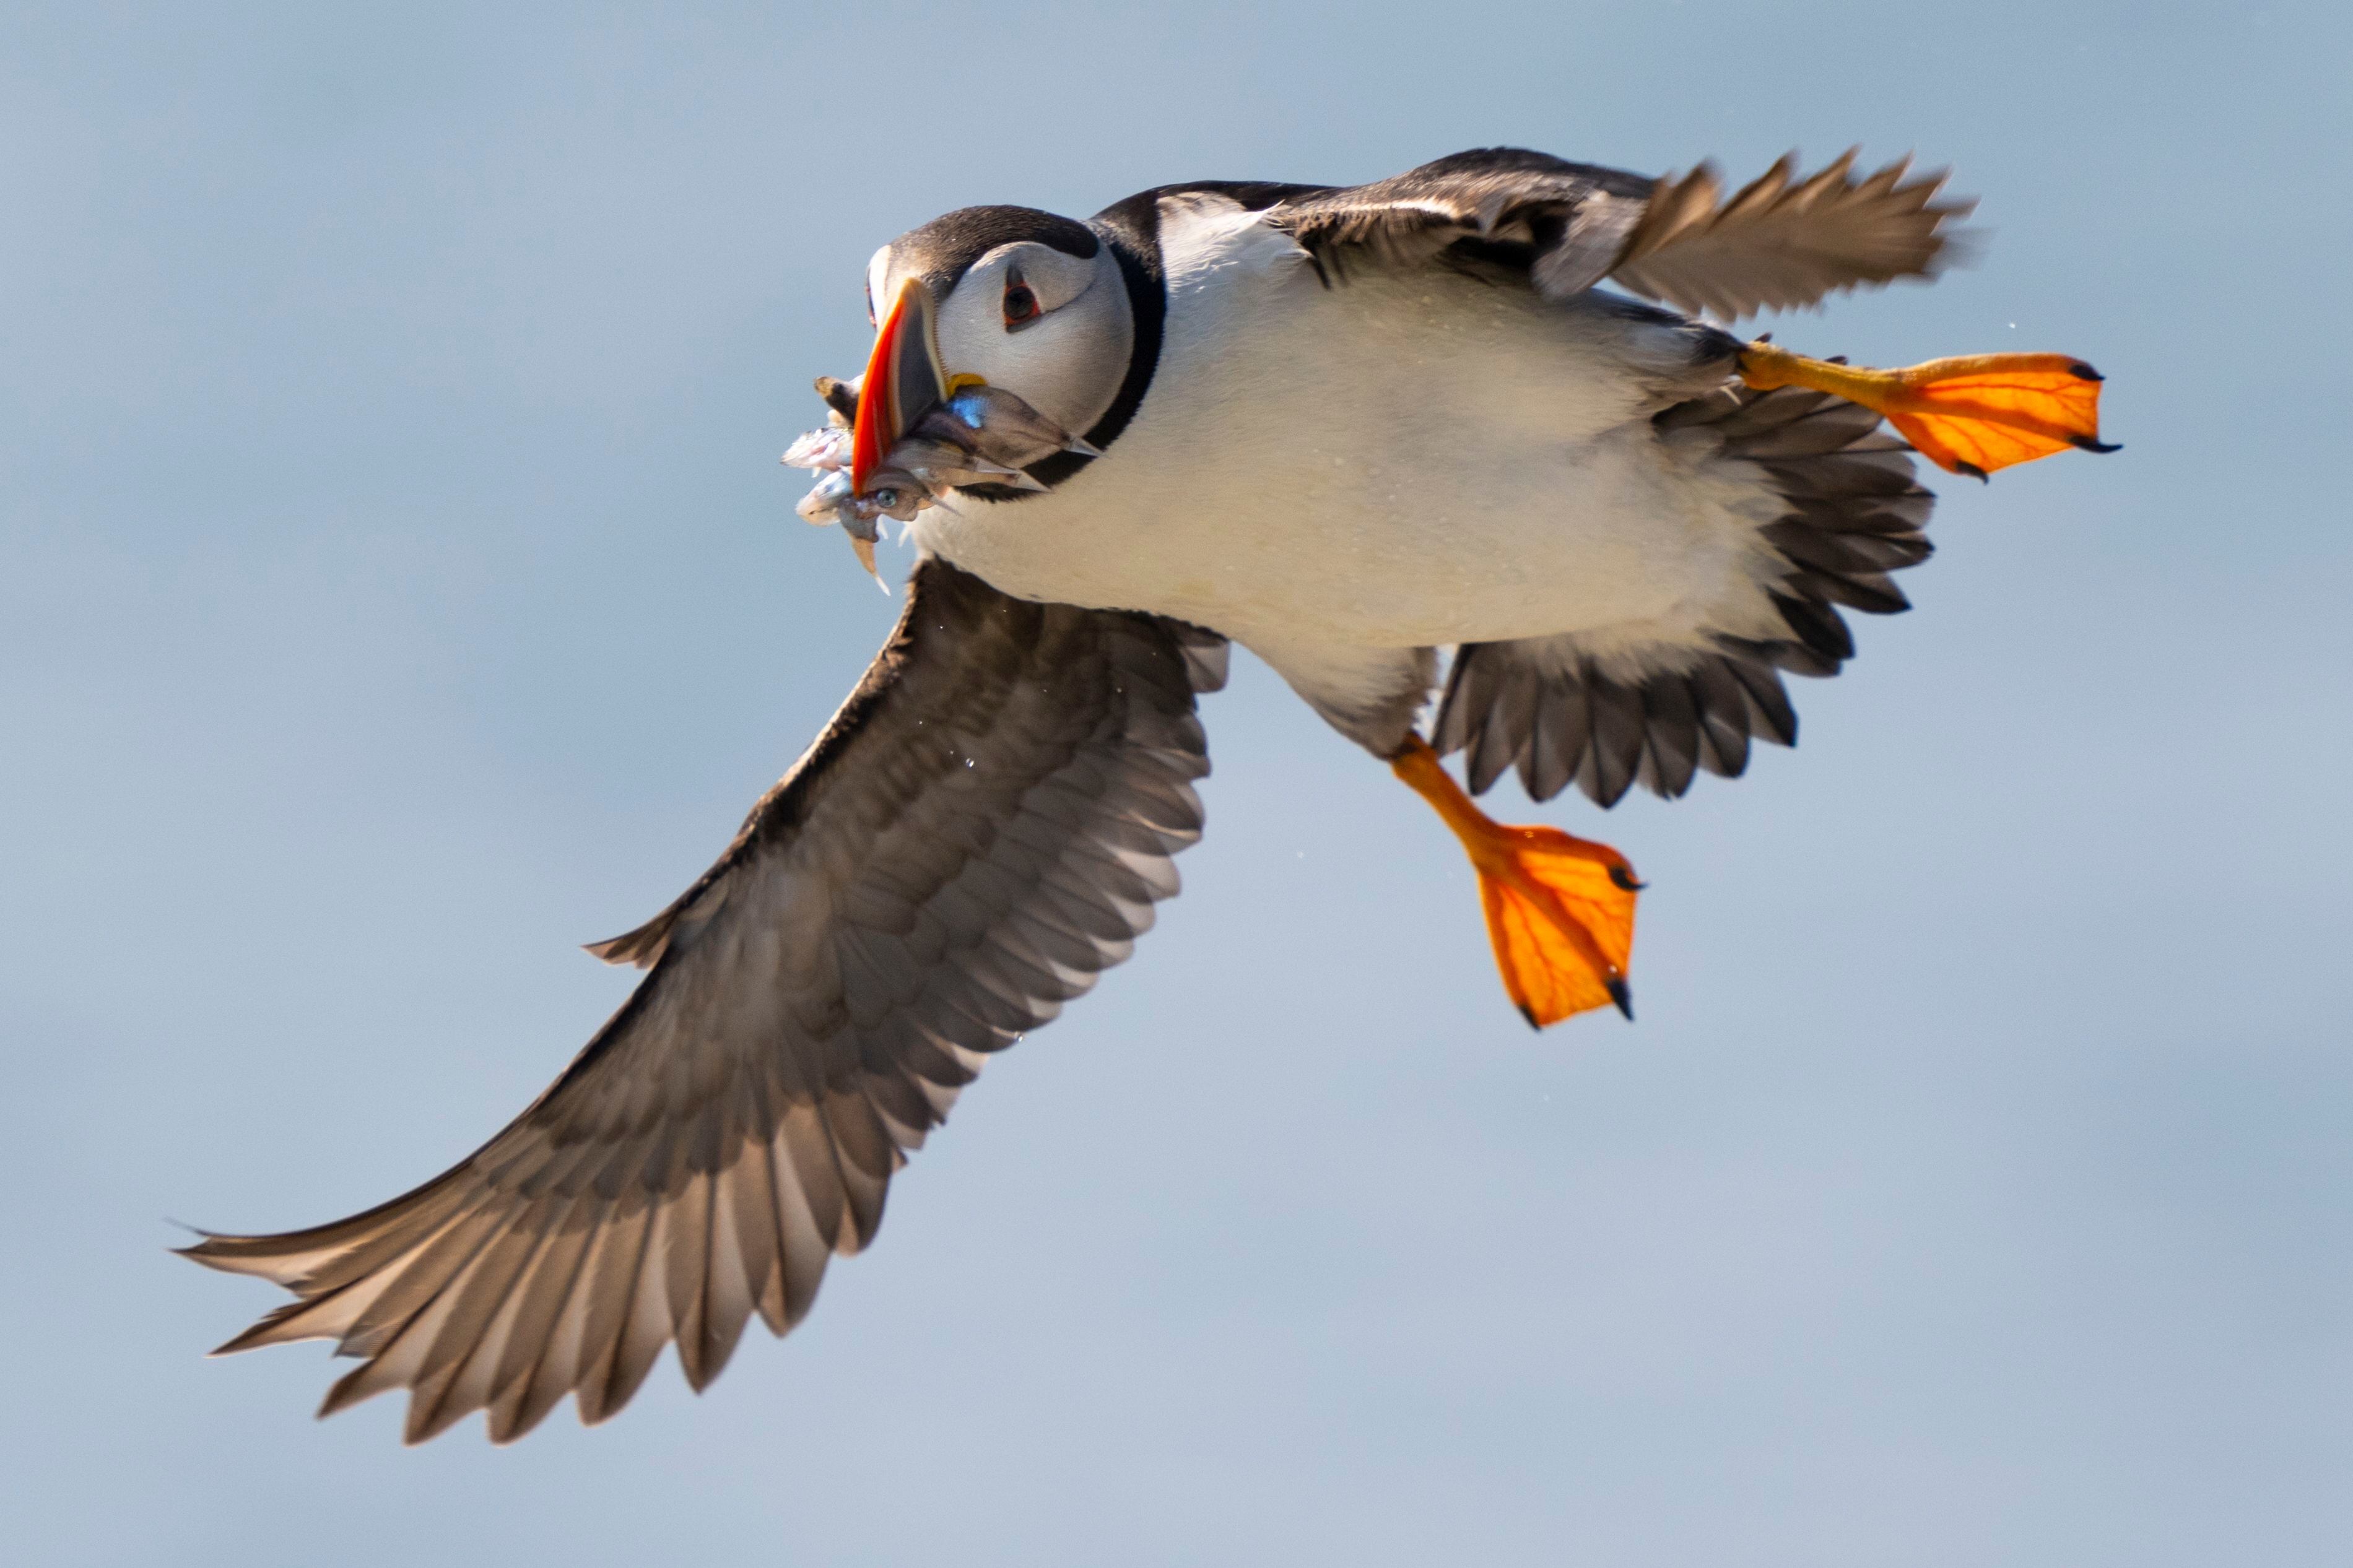 Global warming threatens Atlantic puffin recovery in Maine » Yale